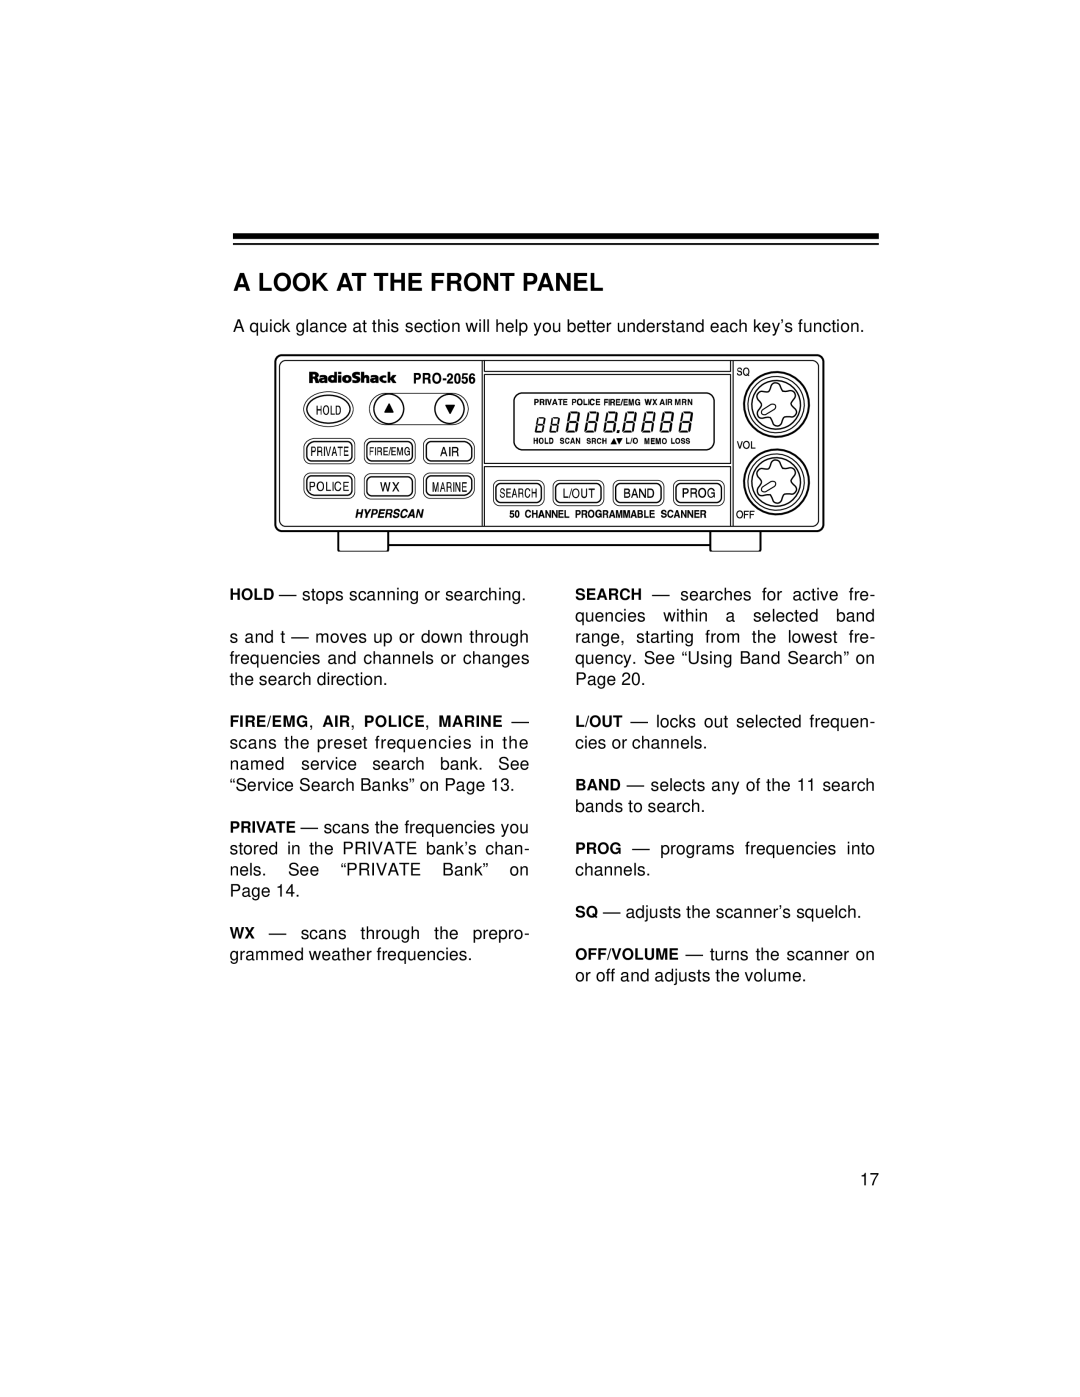 Radio Shack PRO-2056 owner manual A Look At The Front Panel 